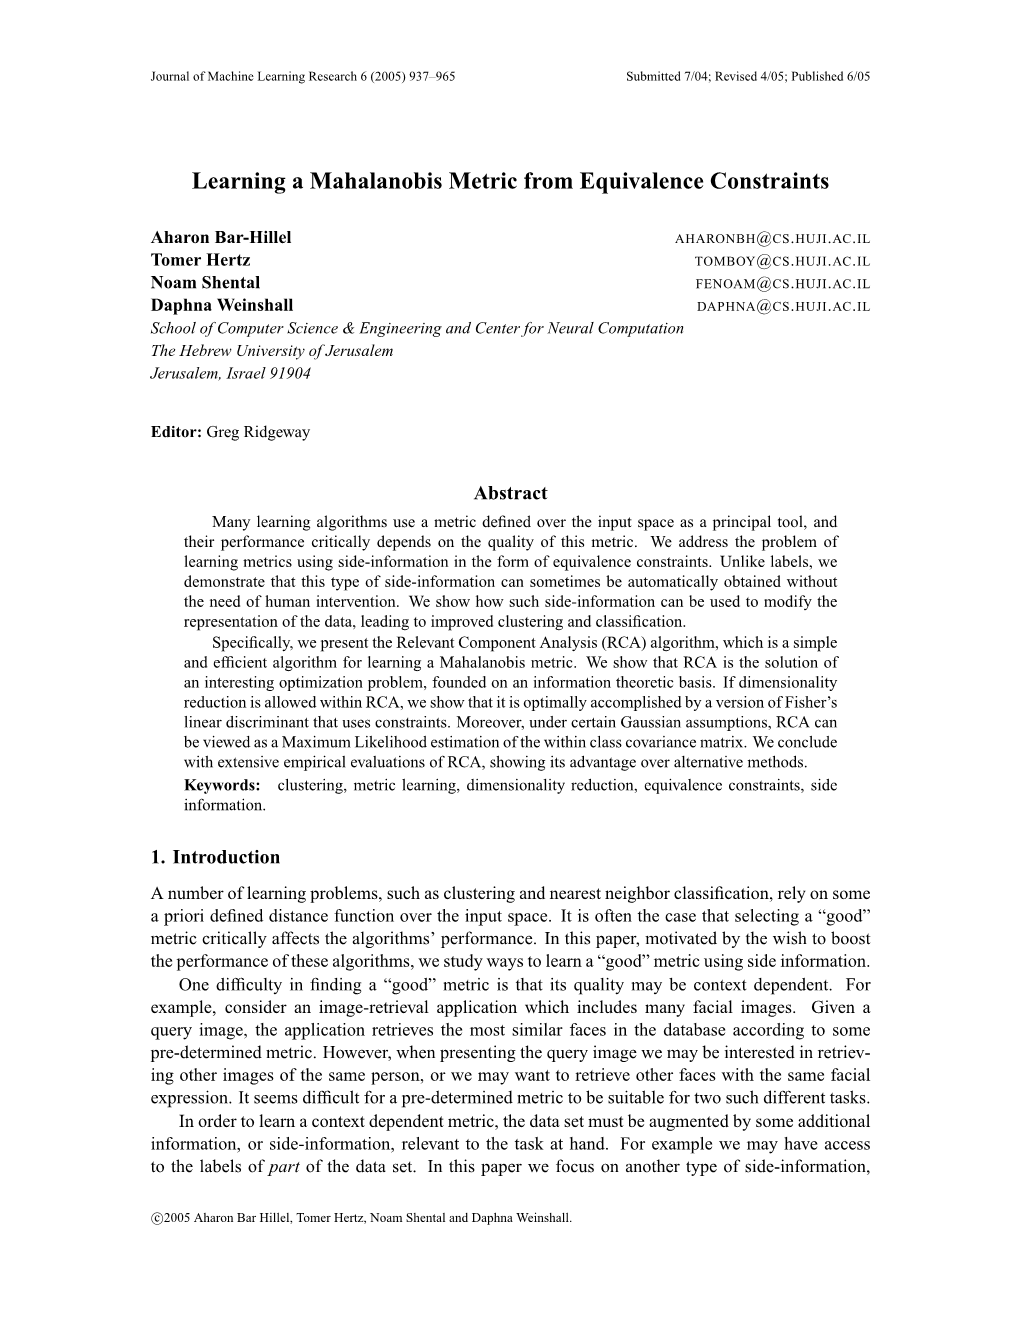 Learning a Mahalanobis Metric from Equivalence Constraints